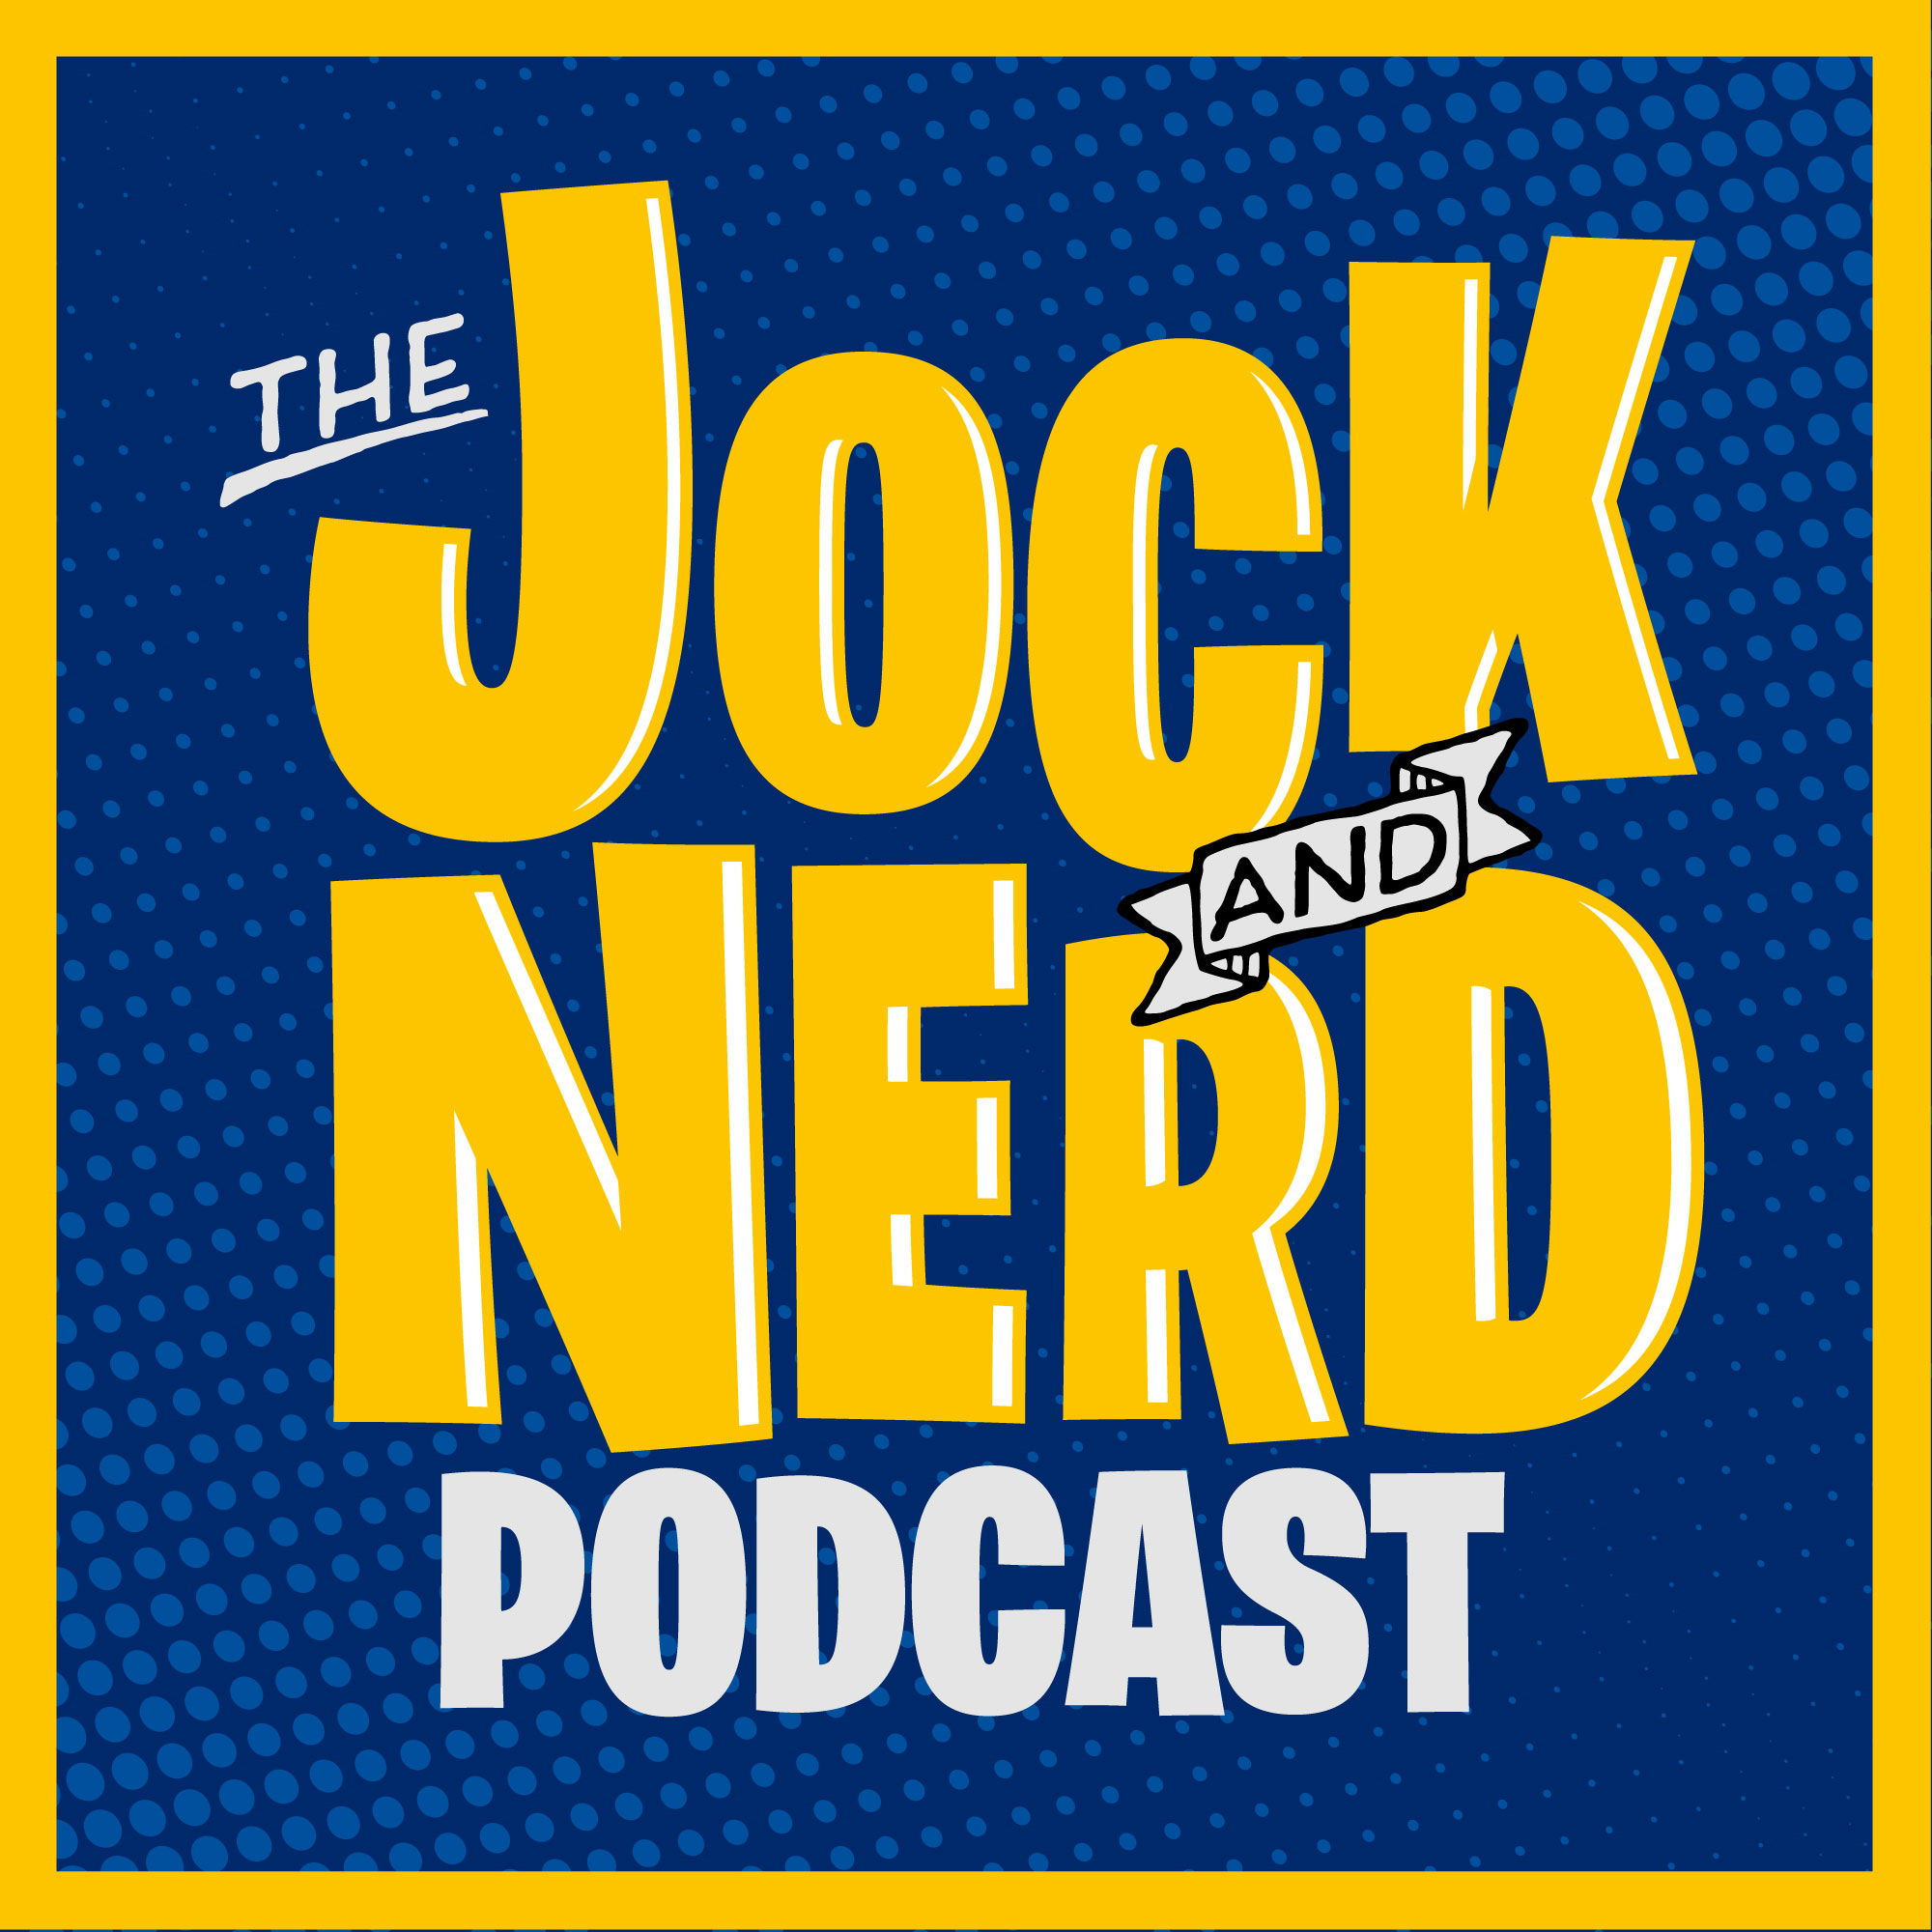 Podcasts talking about Jock and Nerd